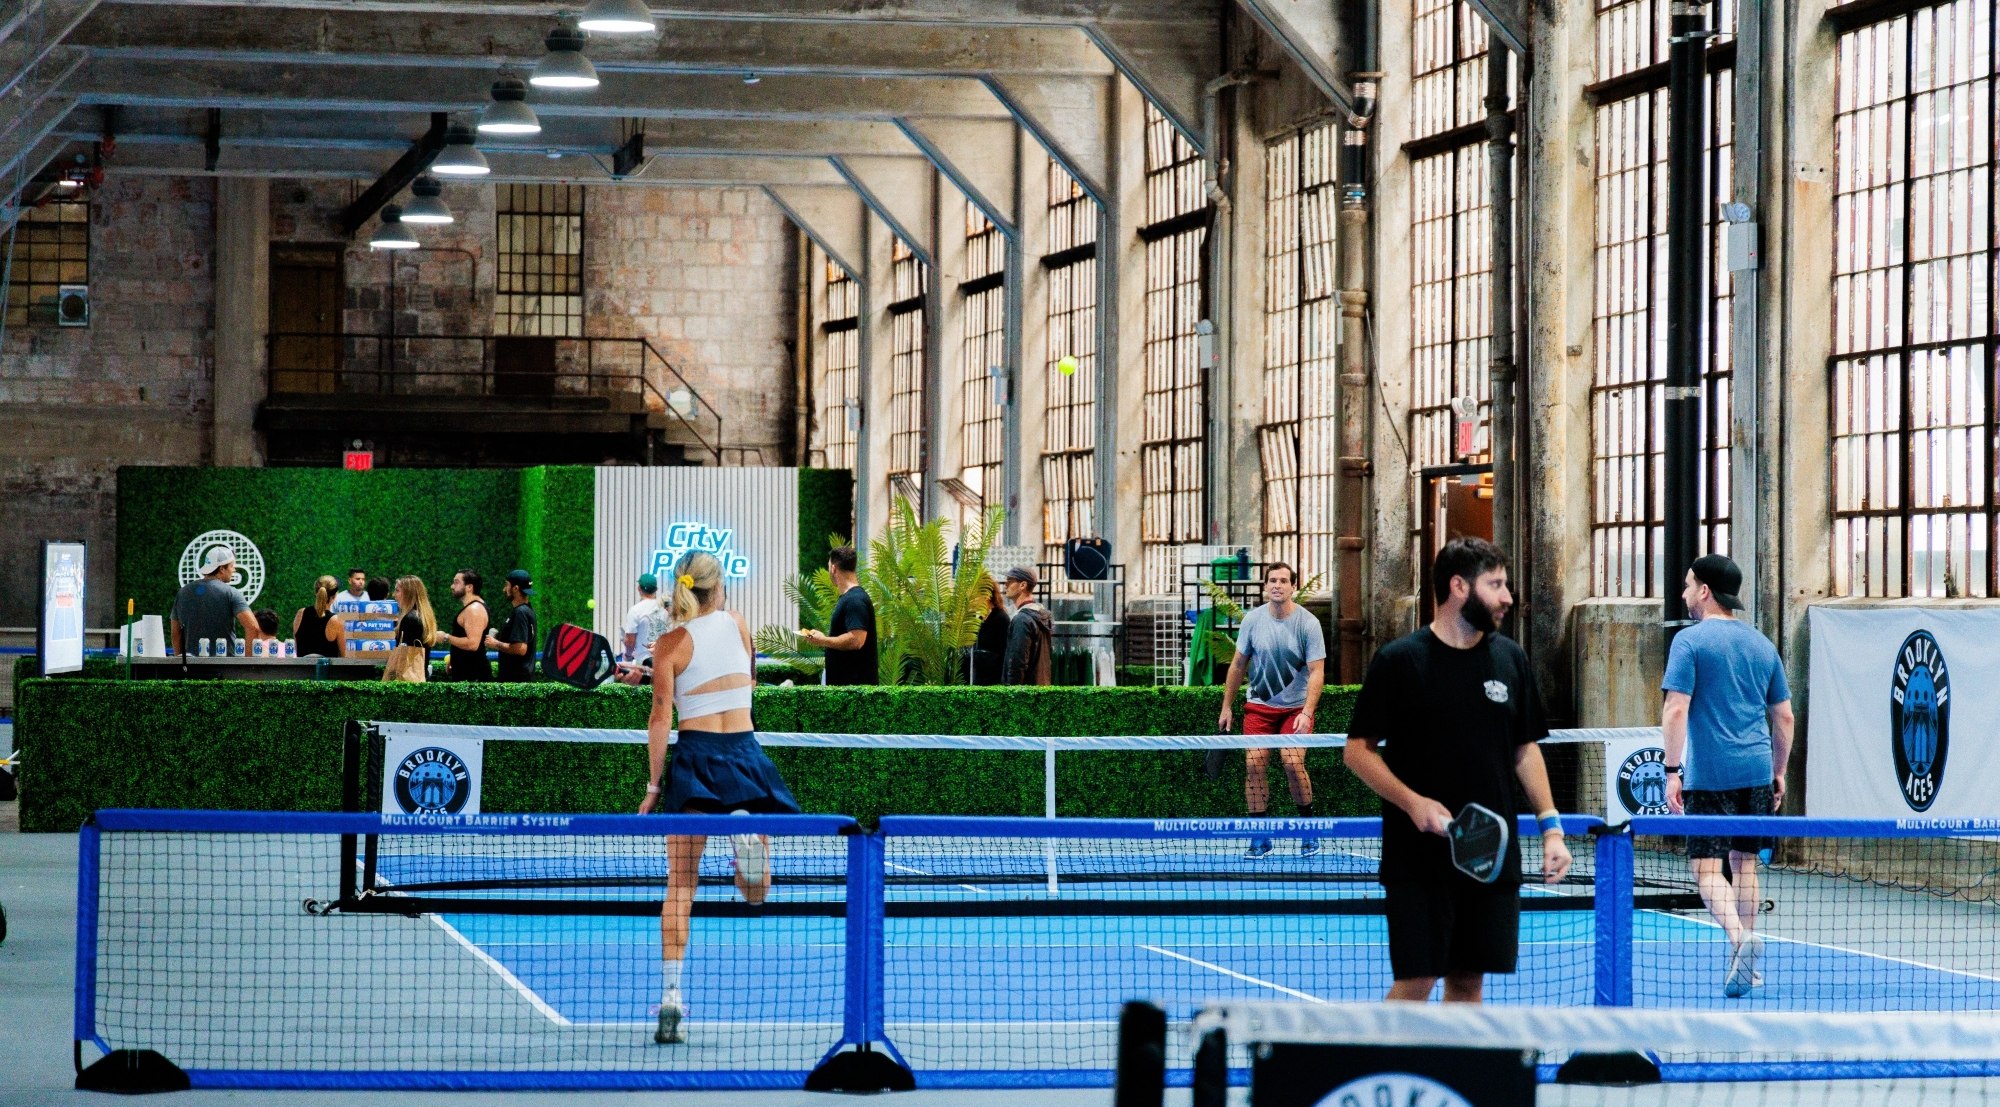 The interior of an event space. People are playing pickleball.